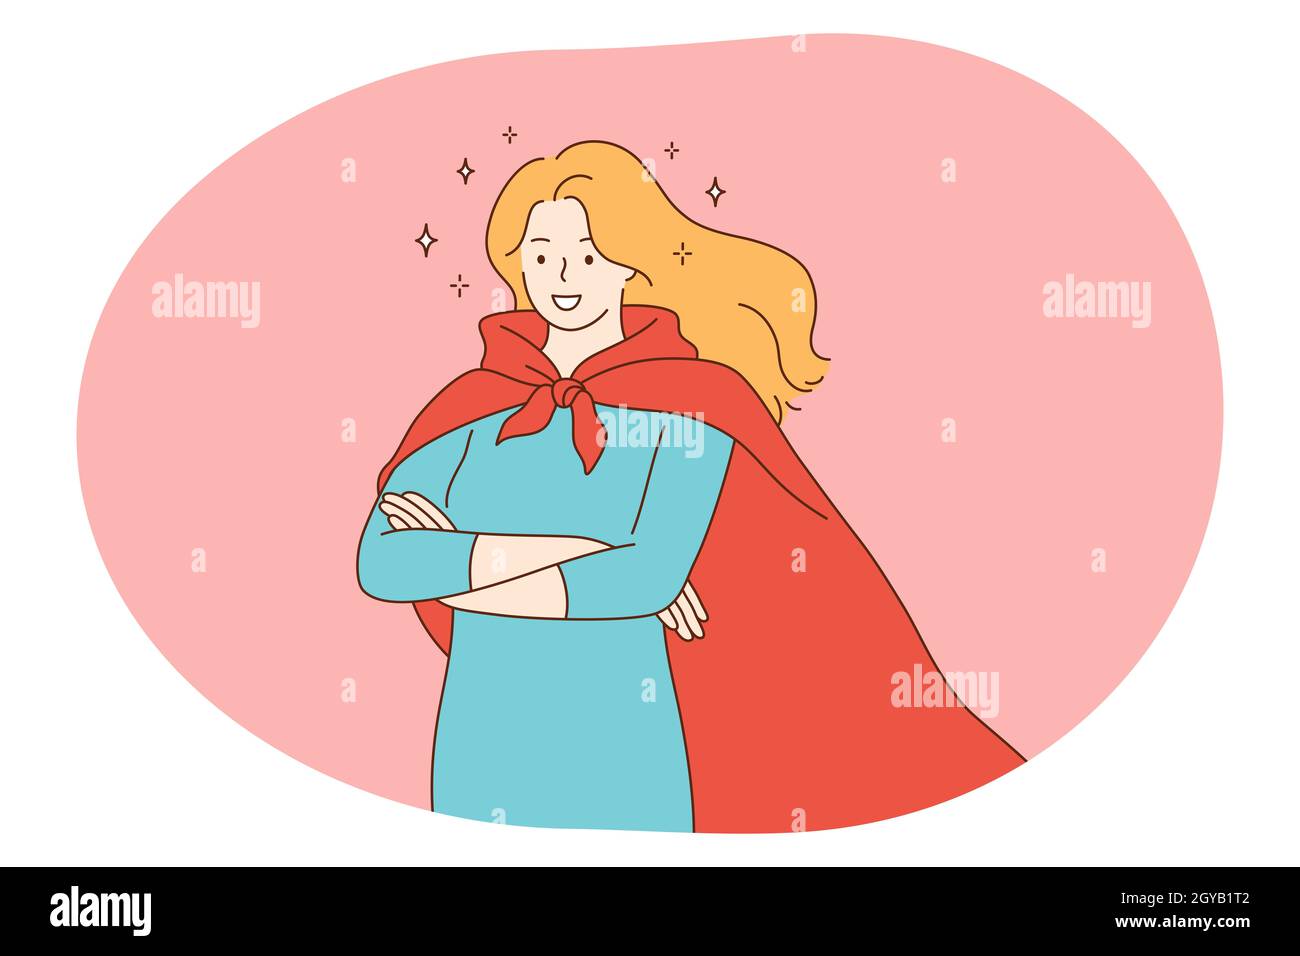 Superhero, superman, power concept. Young smiling woman in red superman costume mantle standing imagining superpower and strength. Fantasy, imaginatio Stock Photo